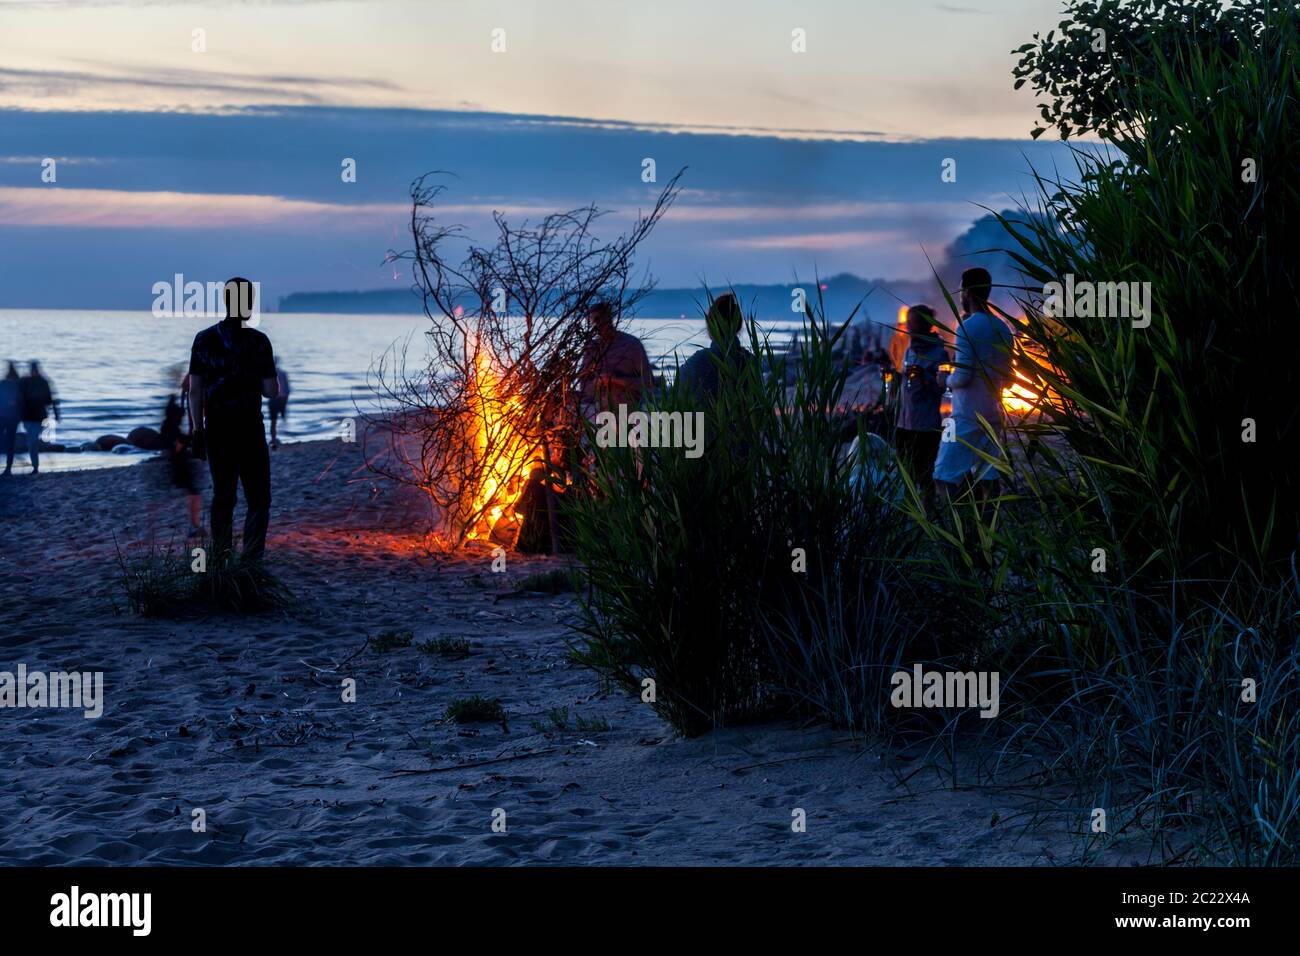 Unrecognisable people celebrating summer solstice with bonfires on beach Stock Photo